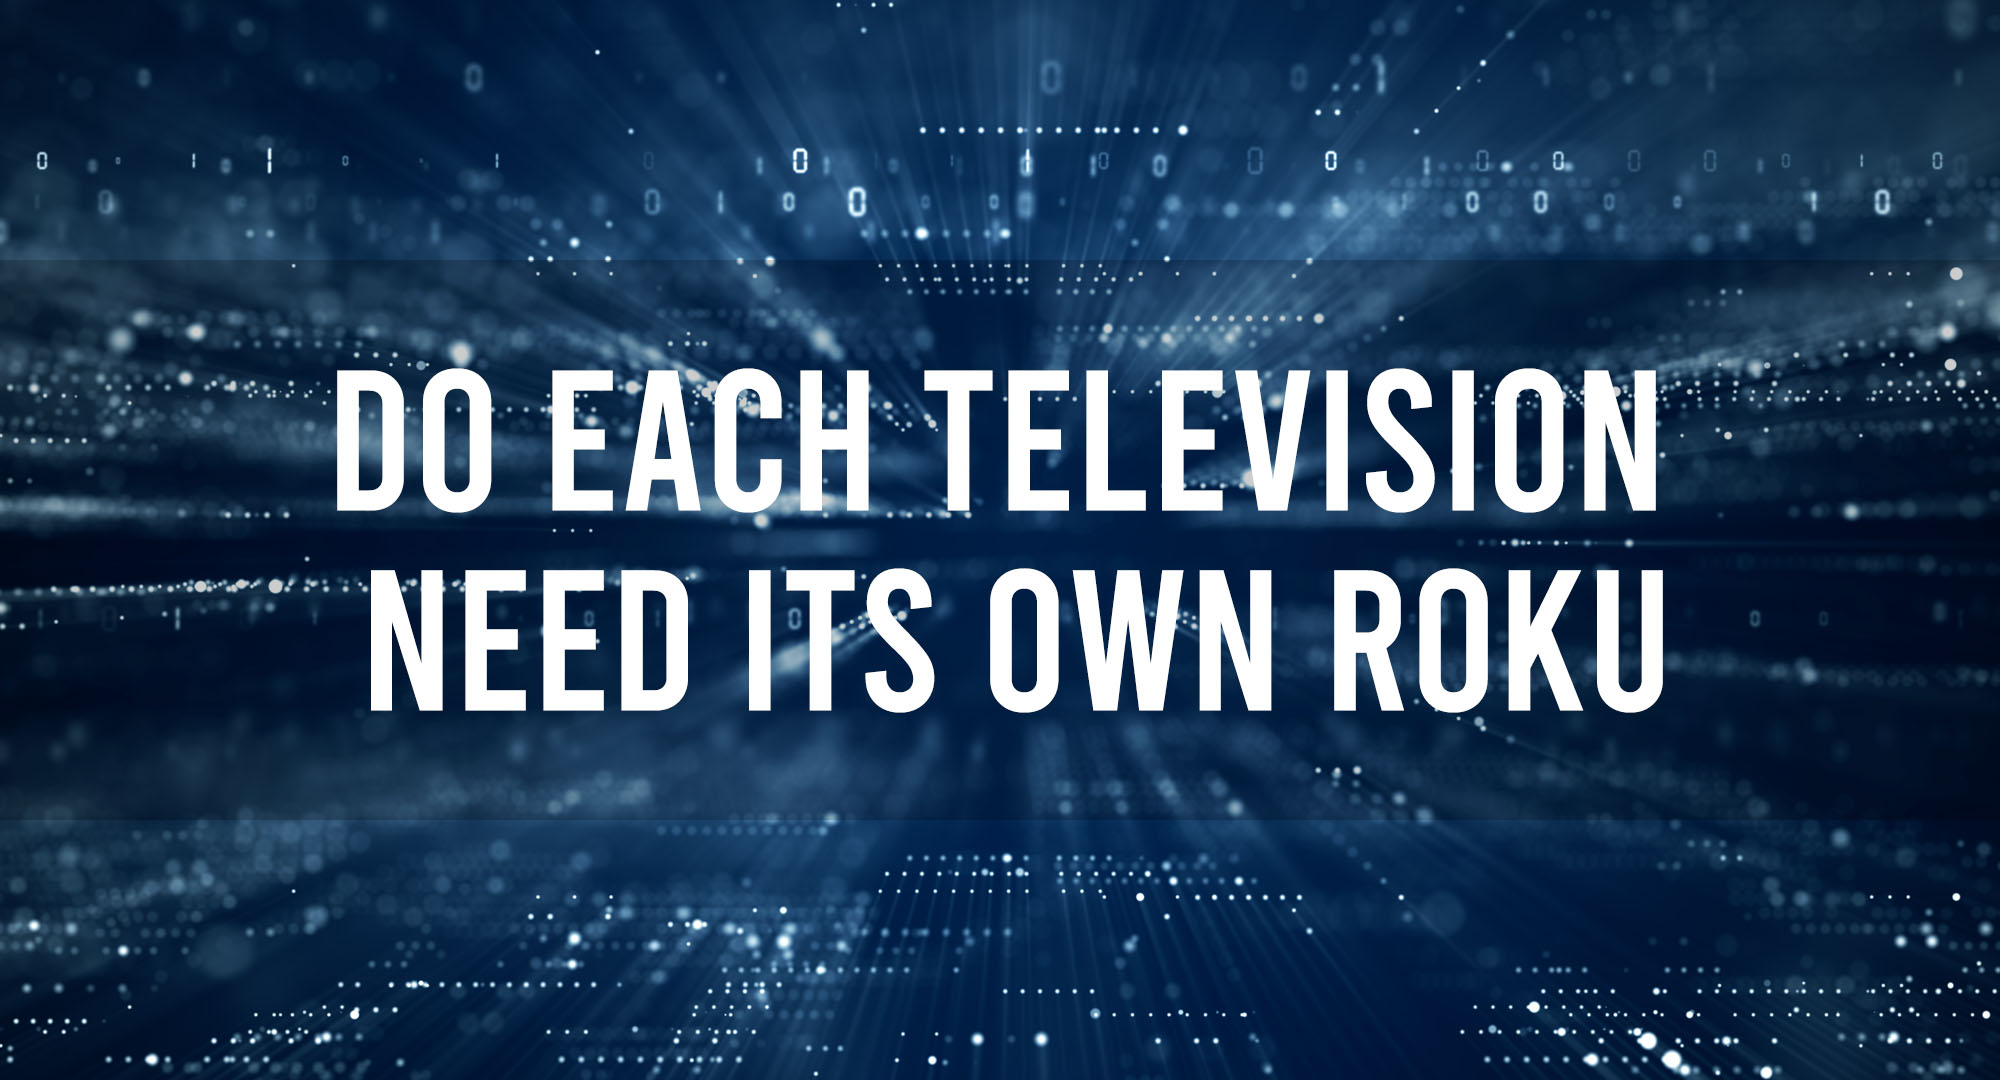 Do each televison need its own roku